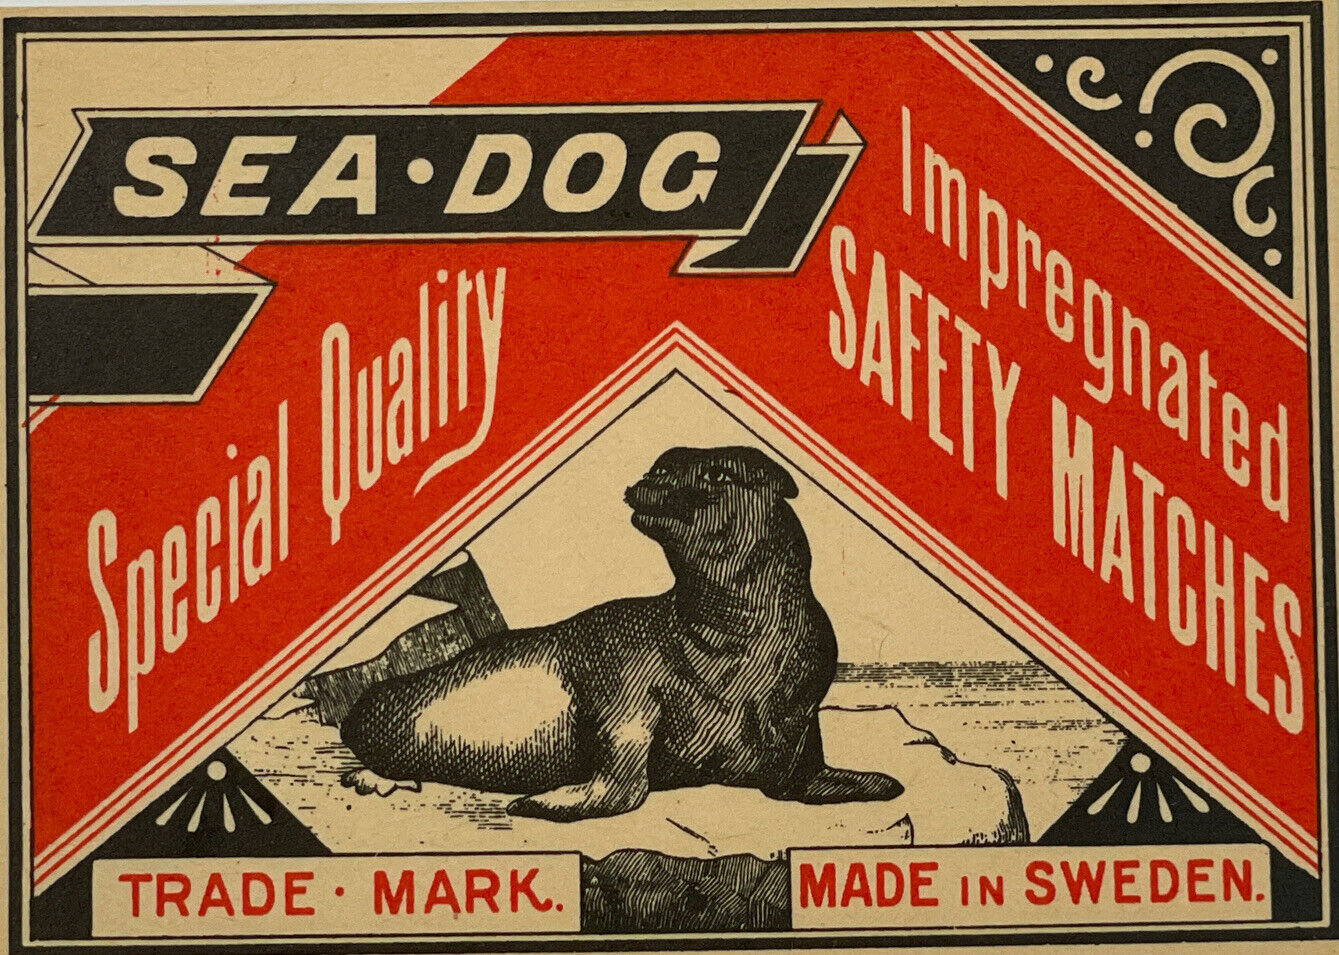 SEA DOG SAFETY MATCHES MATCH BOX LABEL c. 1900 MADE in SWEDEN RARE X-Large